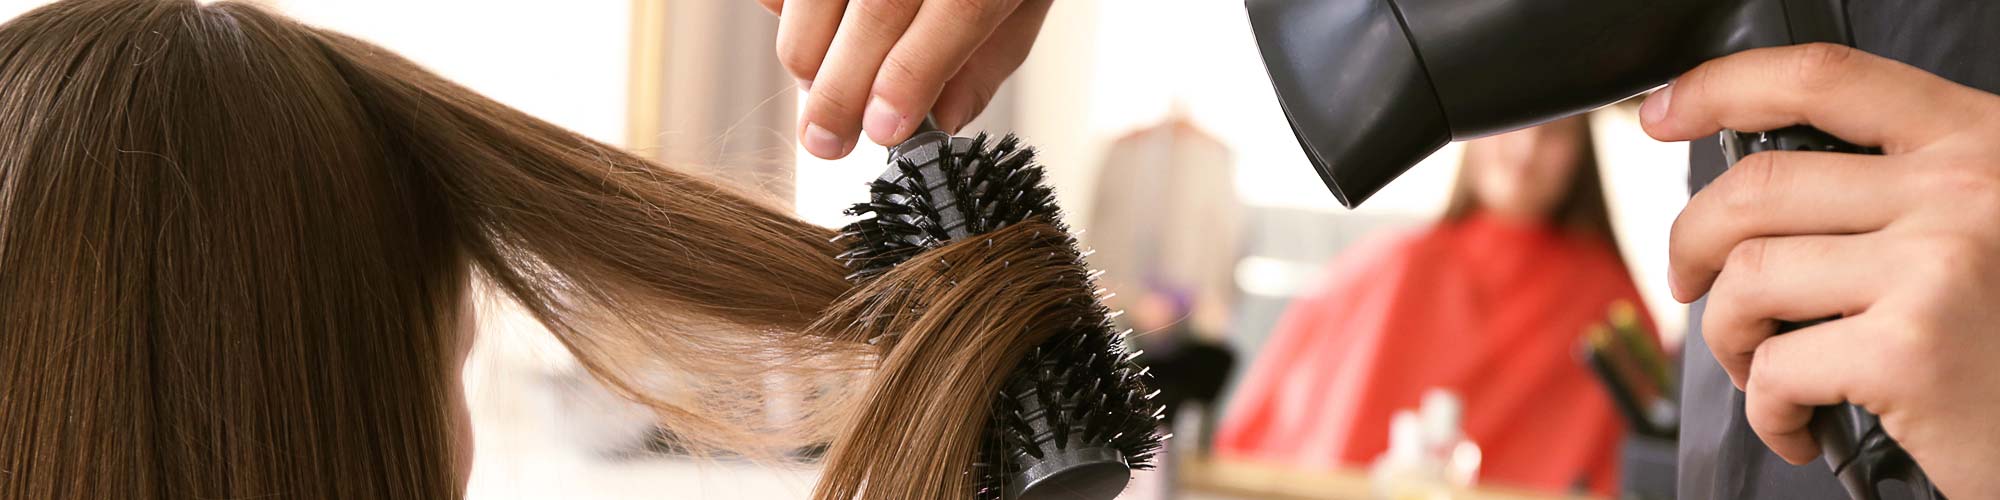 Blow Drying Hair - Our Services